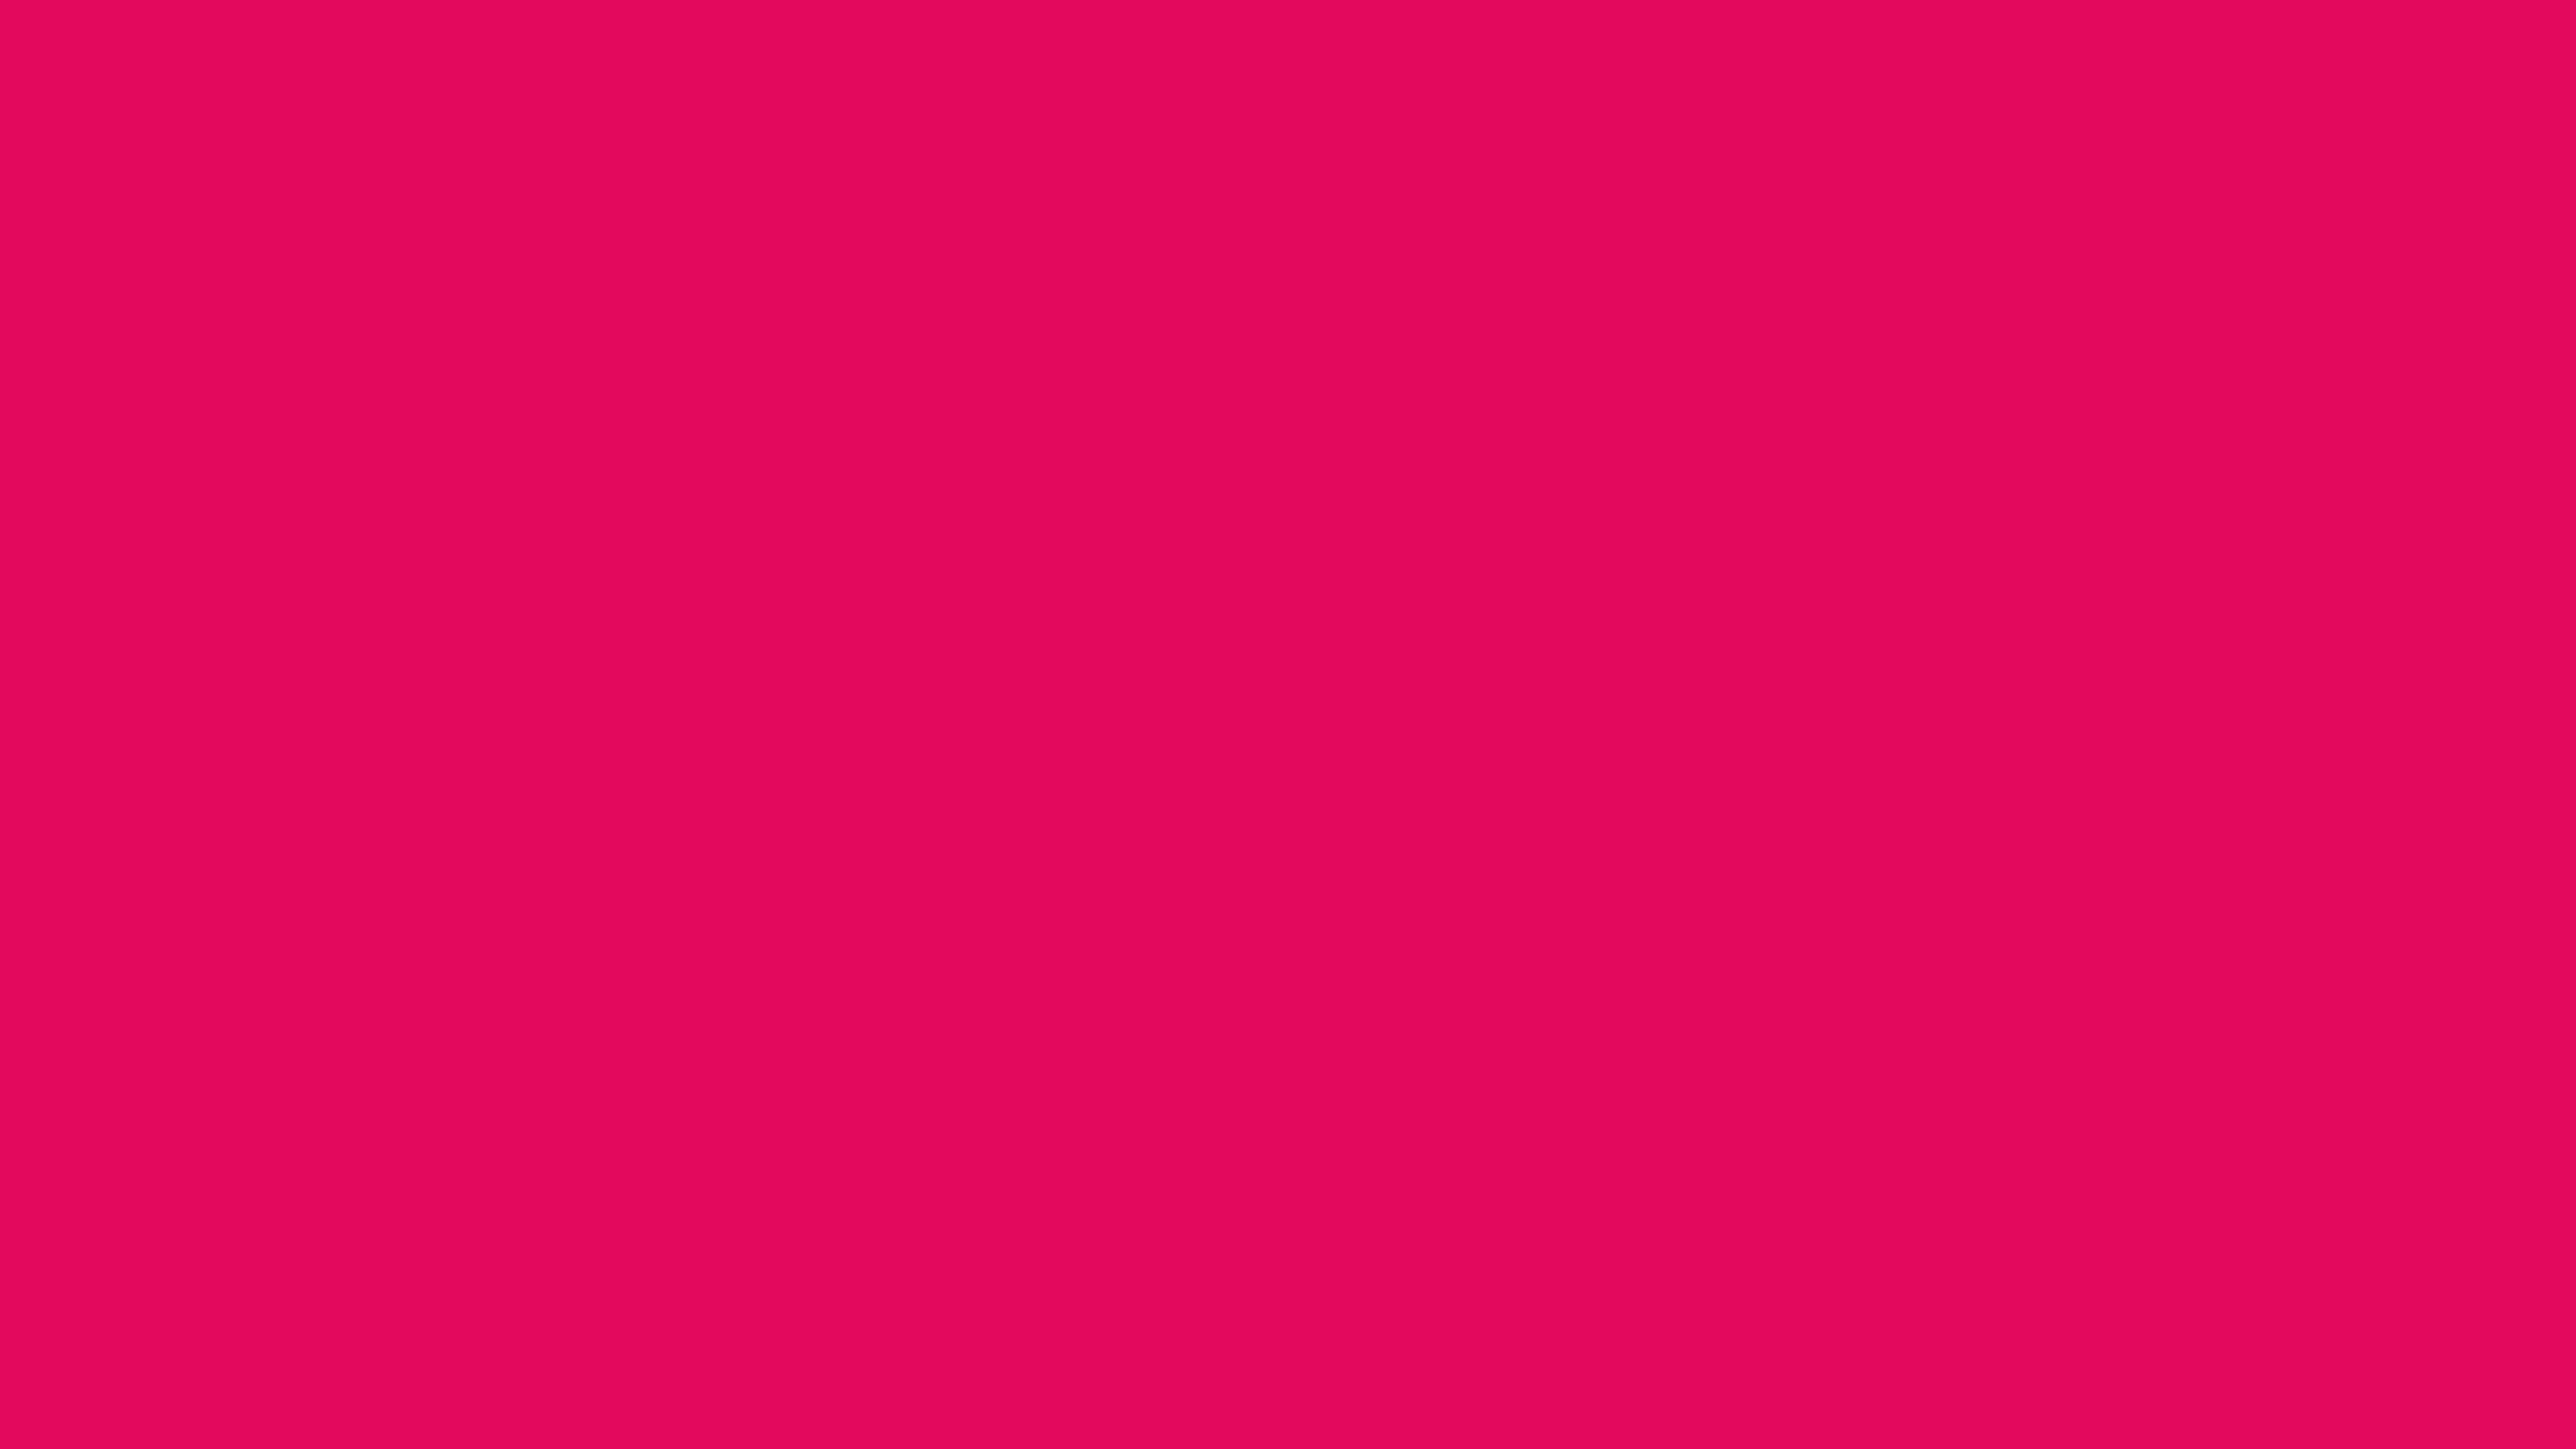 7680x4320 Raspberry Solid Color Background